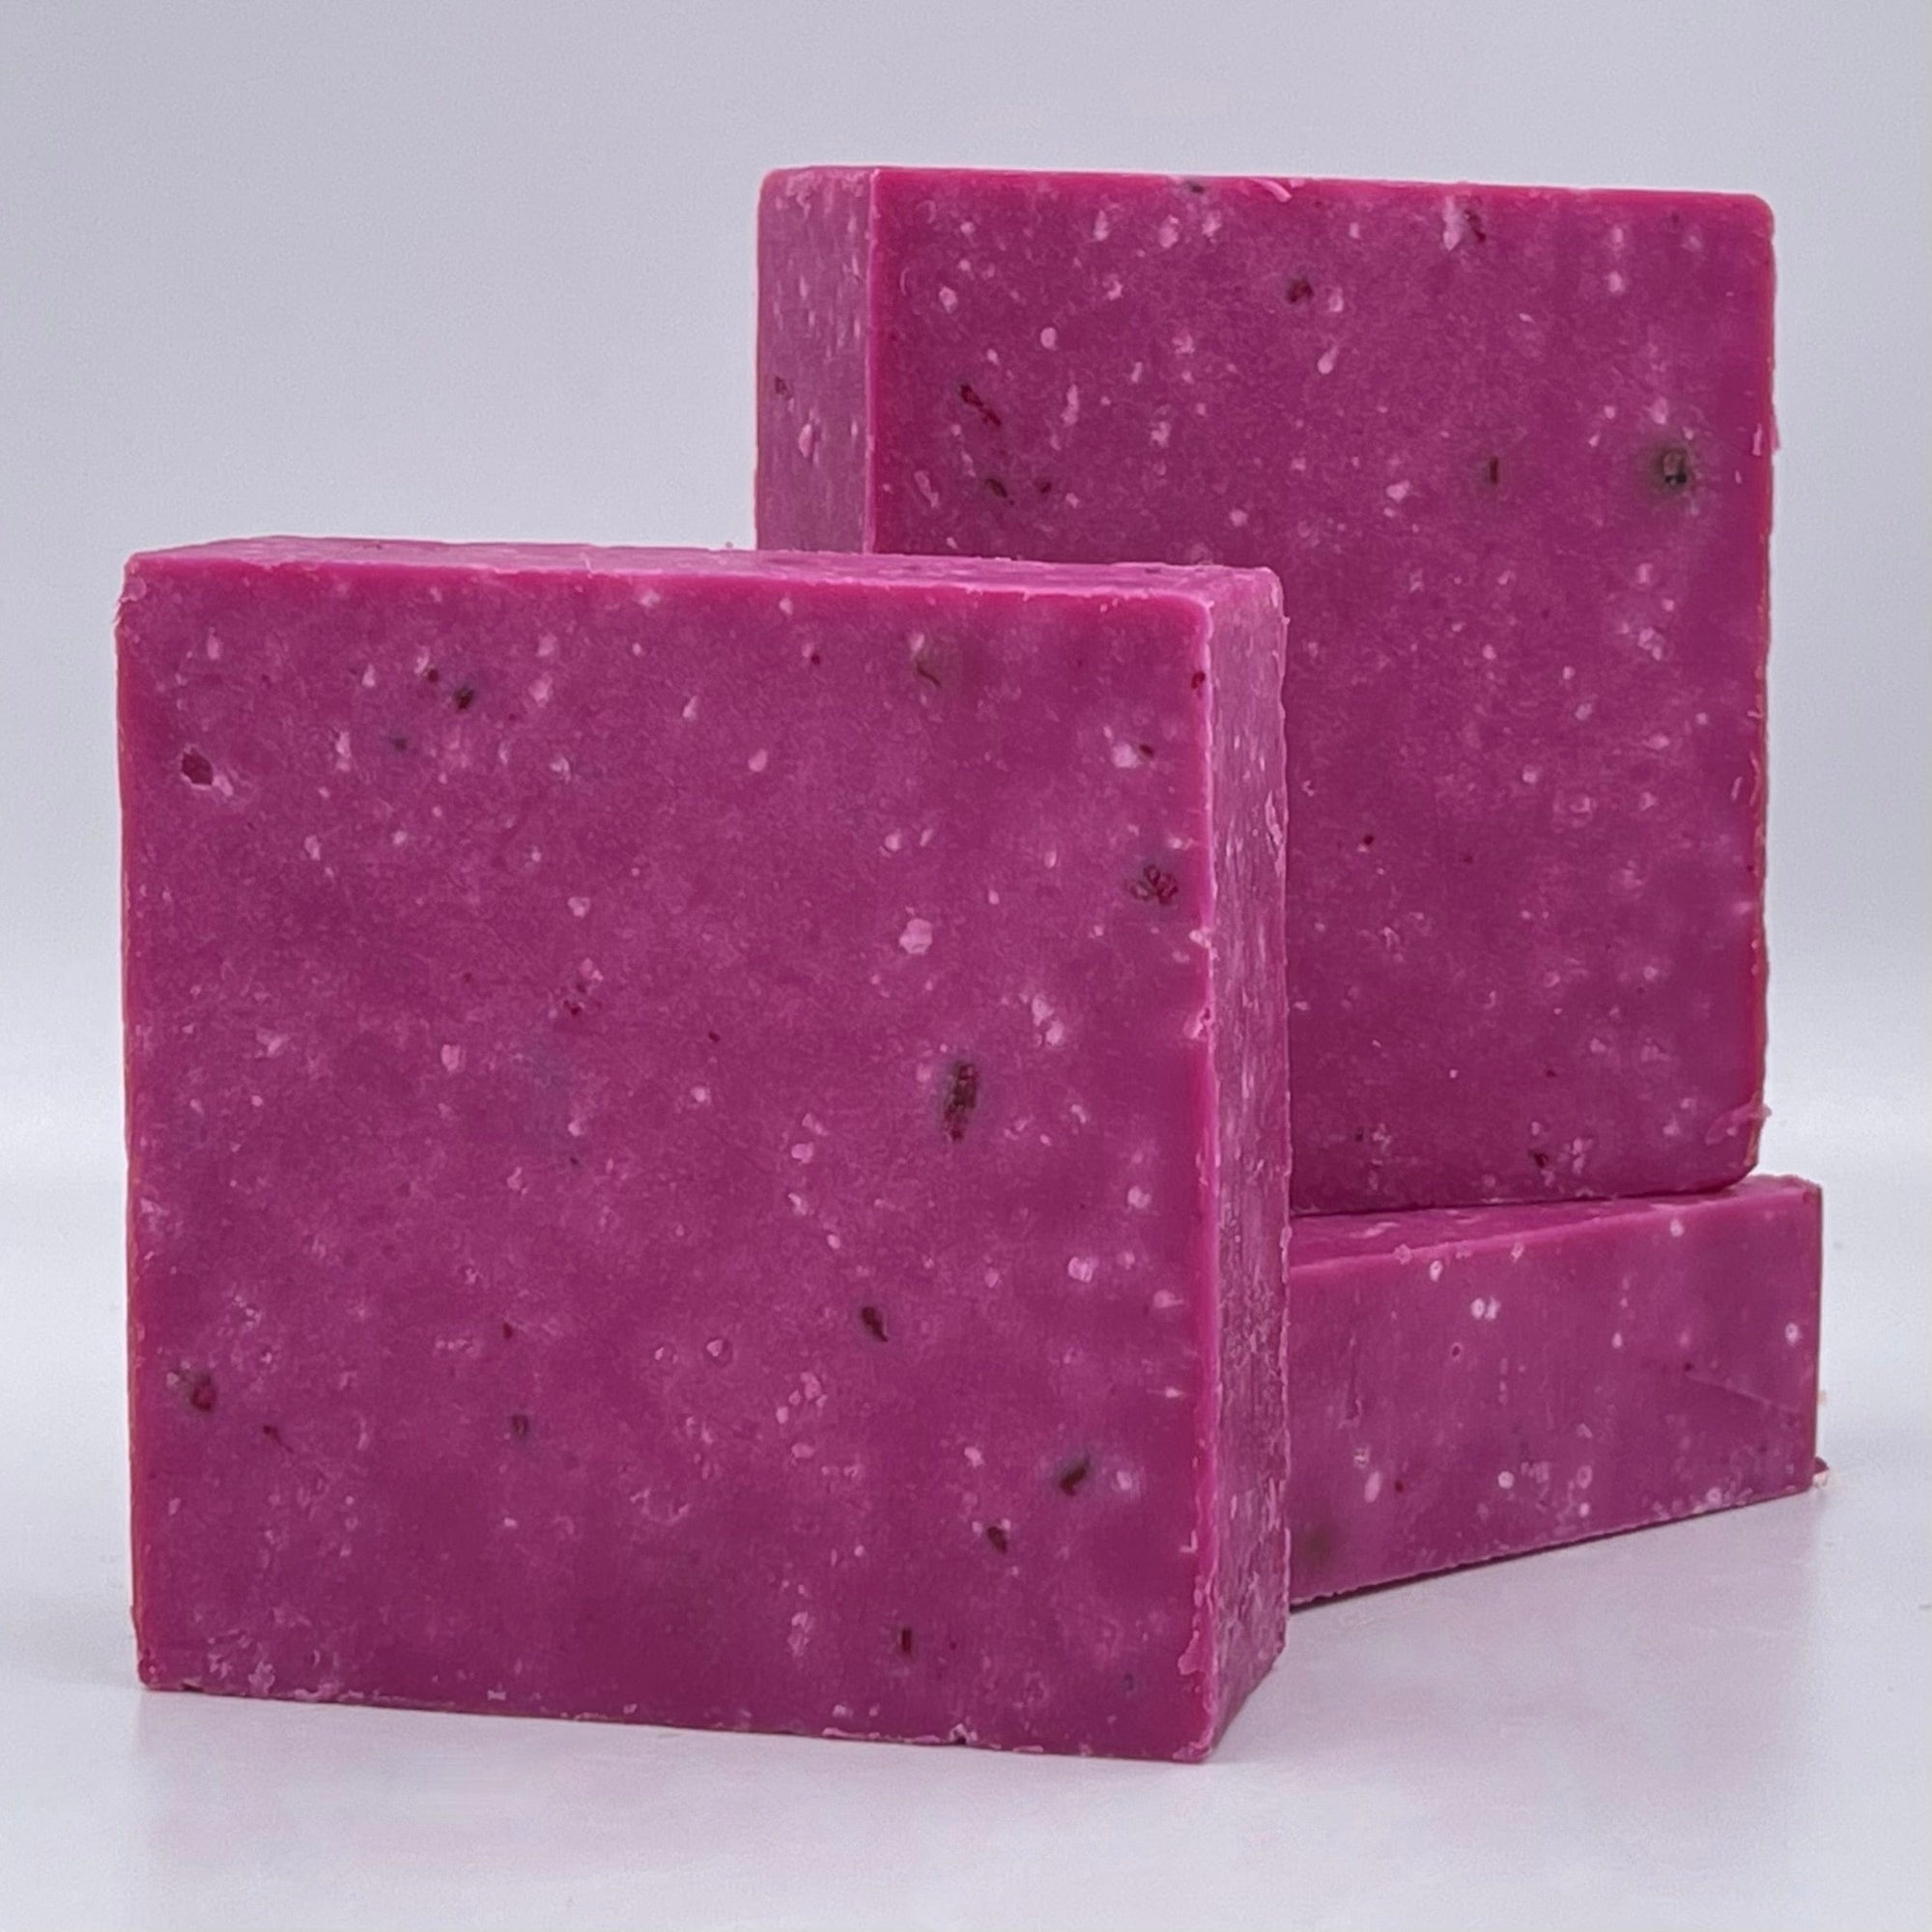 Moonlight and Roses Scrub Soap